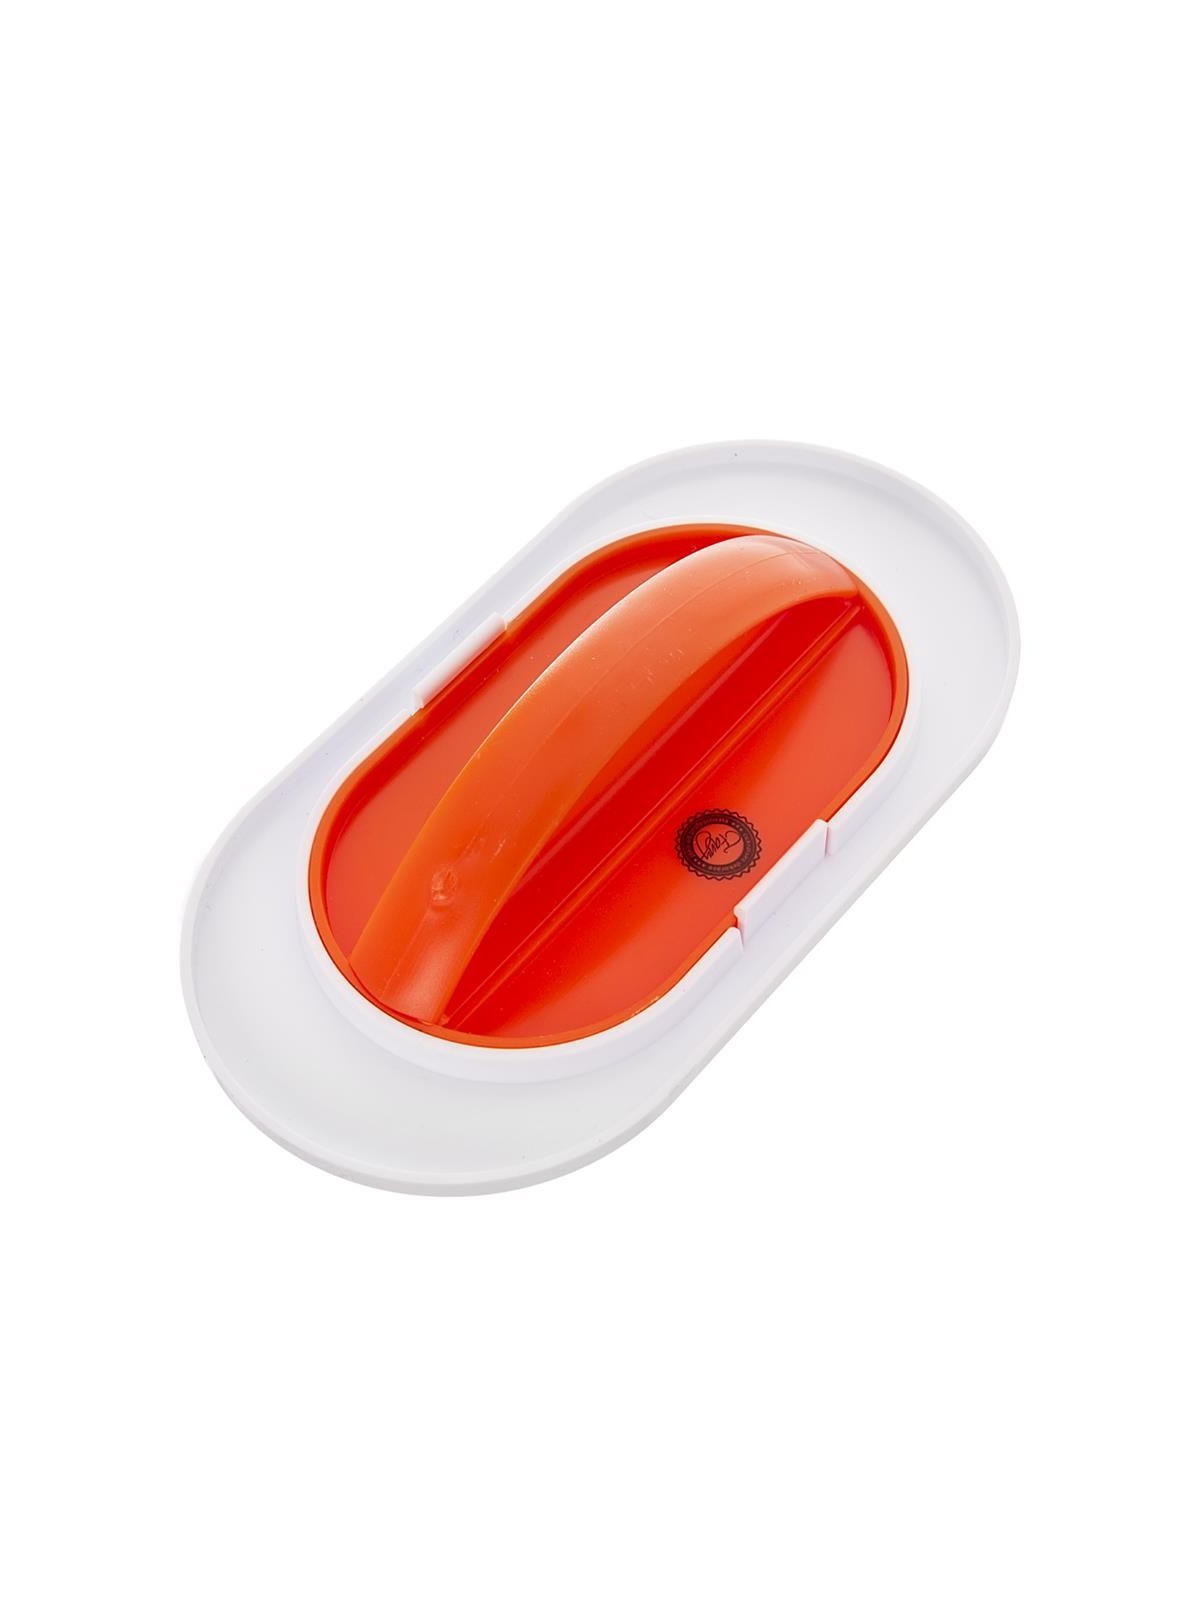 Fondant Smoother - duo - oval